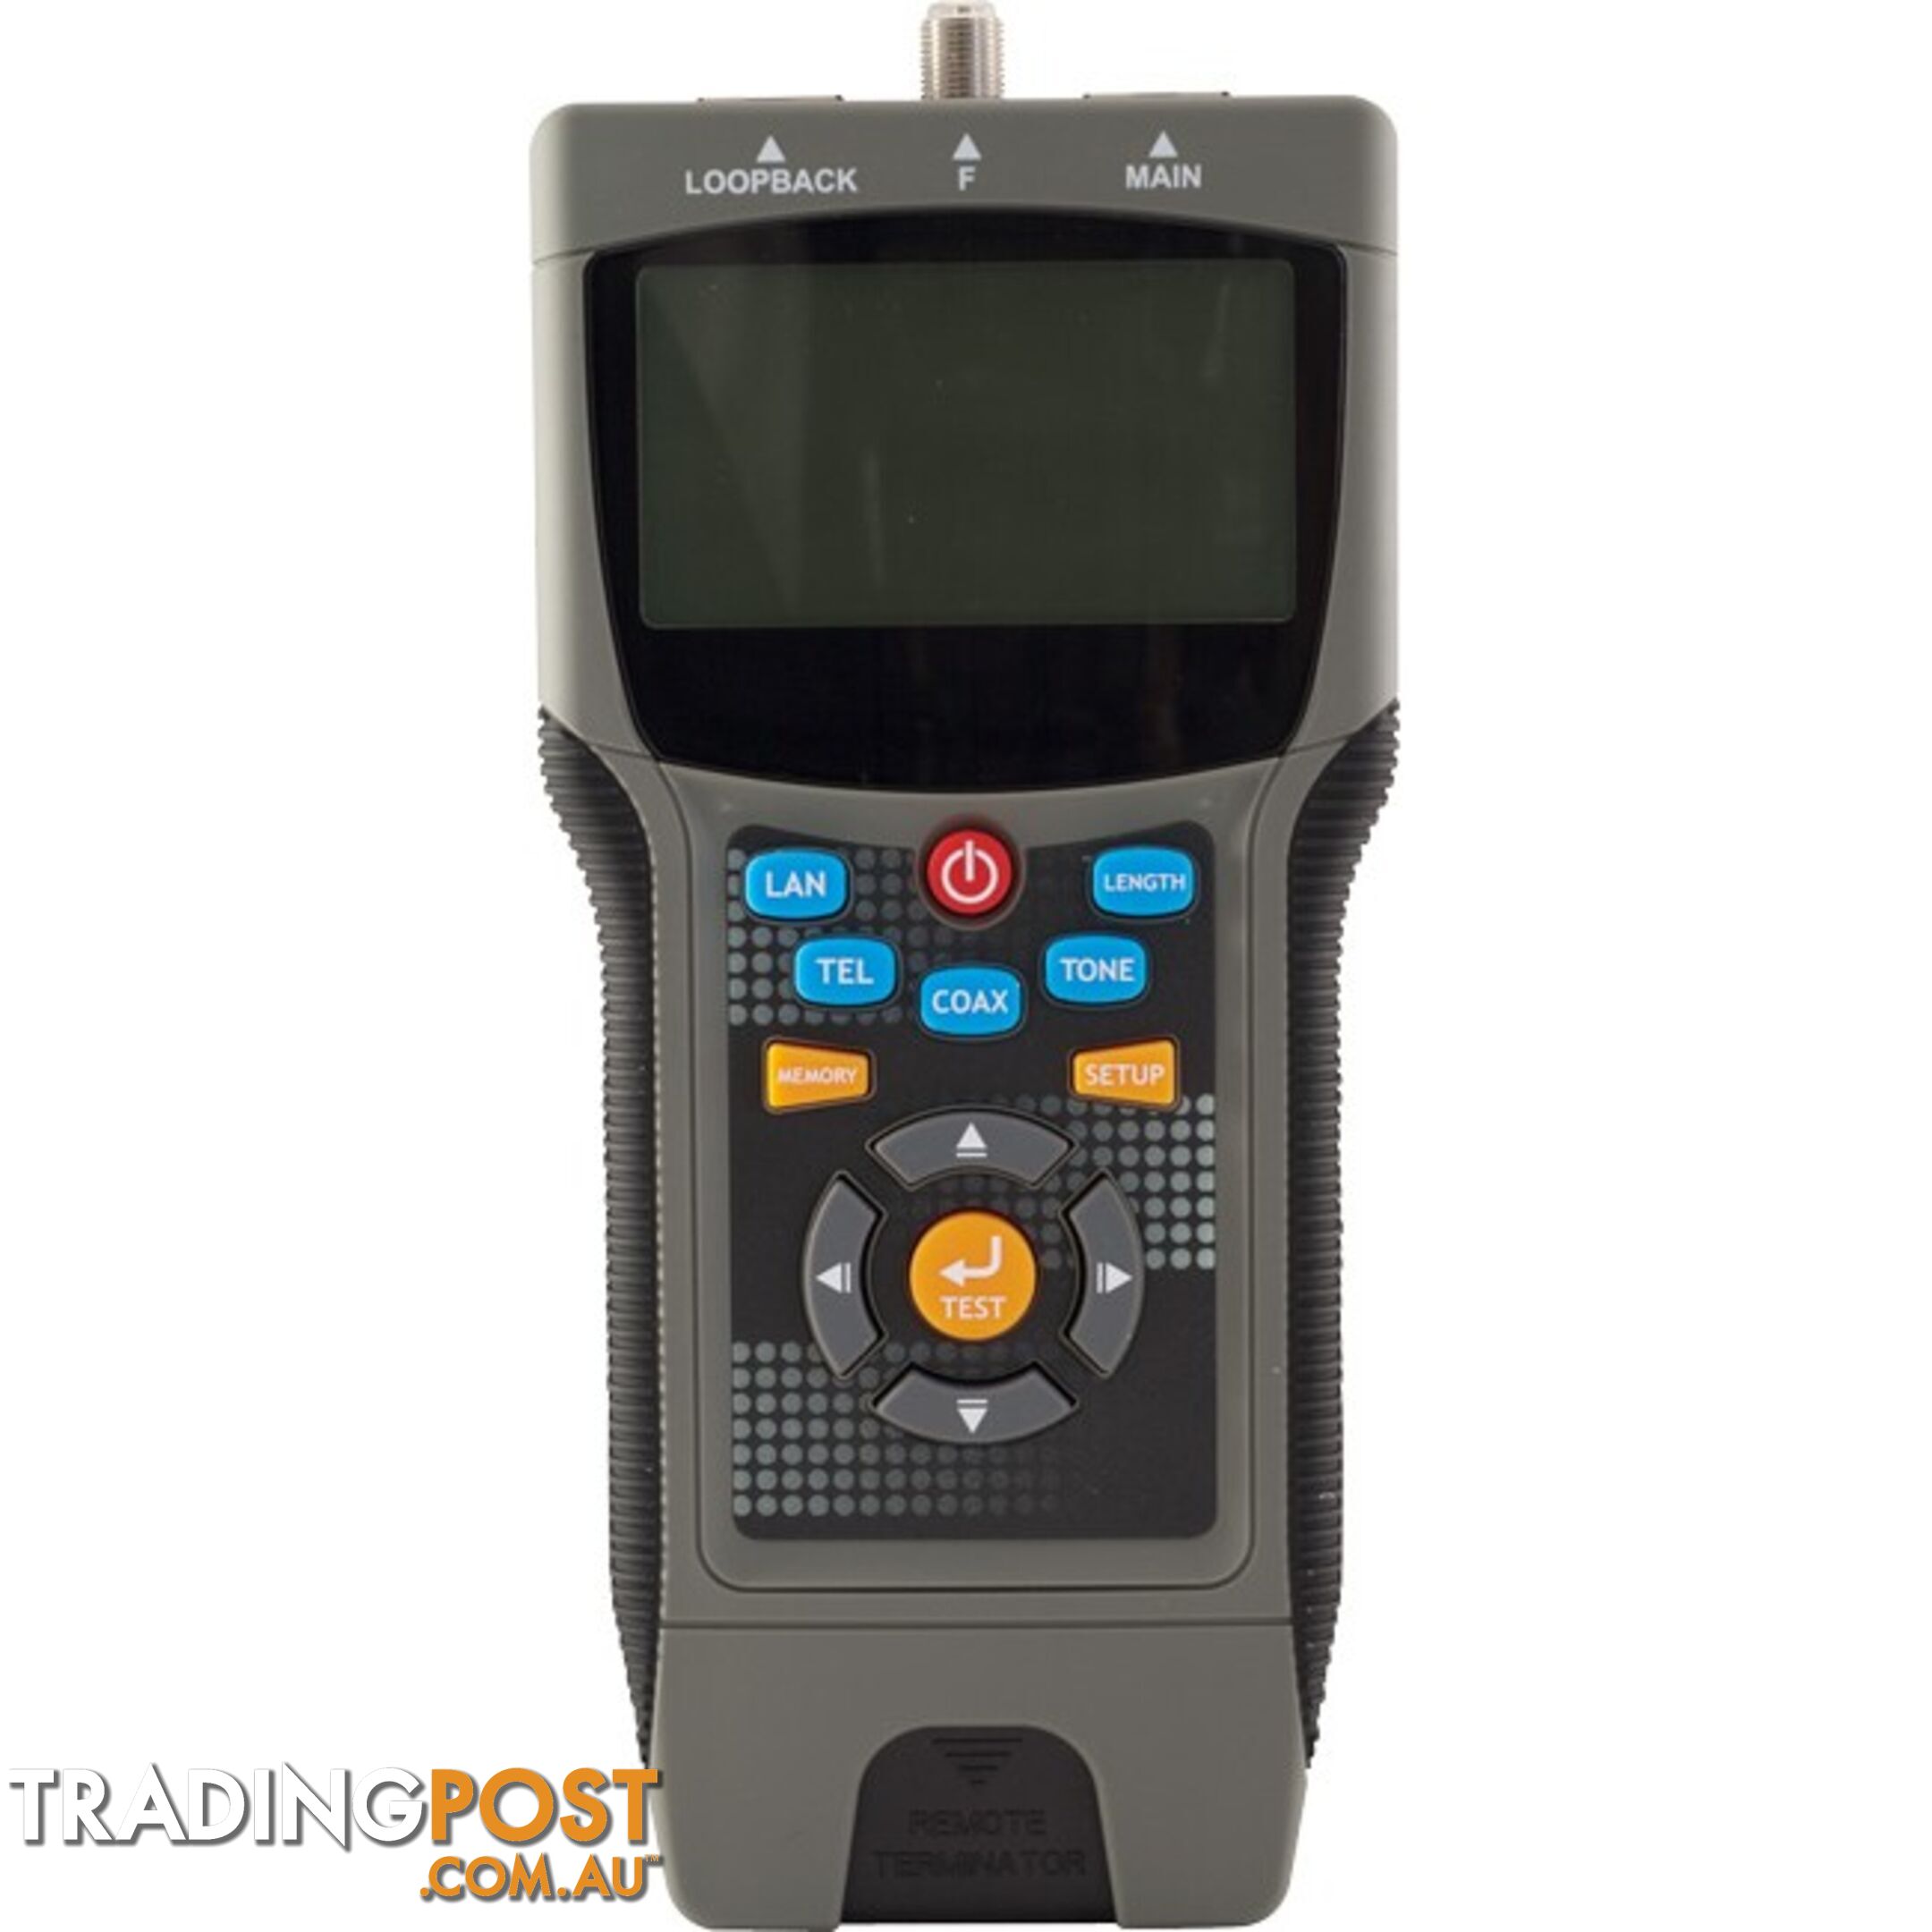 LCT8 PRO COAX & LAN CABLE TESTER LOCATES DISTANCE TO THE FAULT